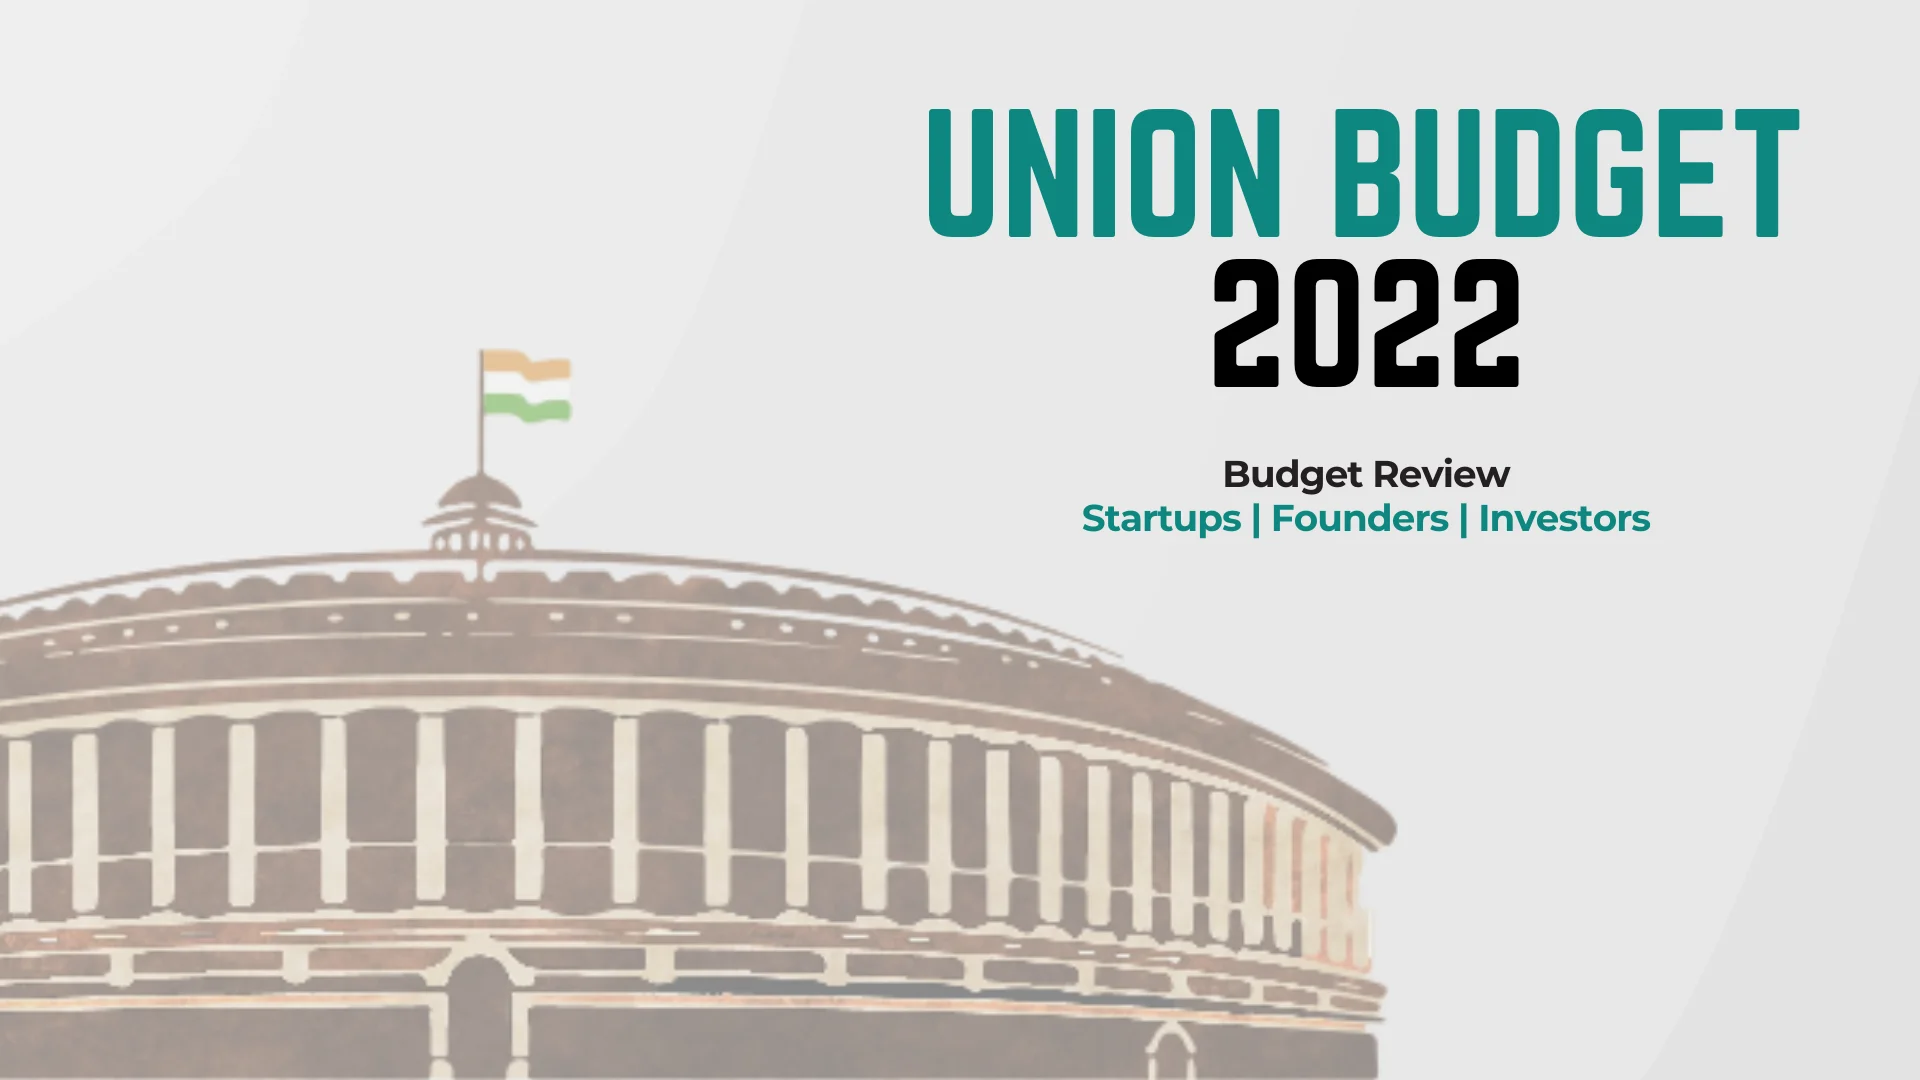 Budget Review 2022 - Impact on Startups, Founders and Investors